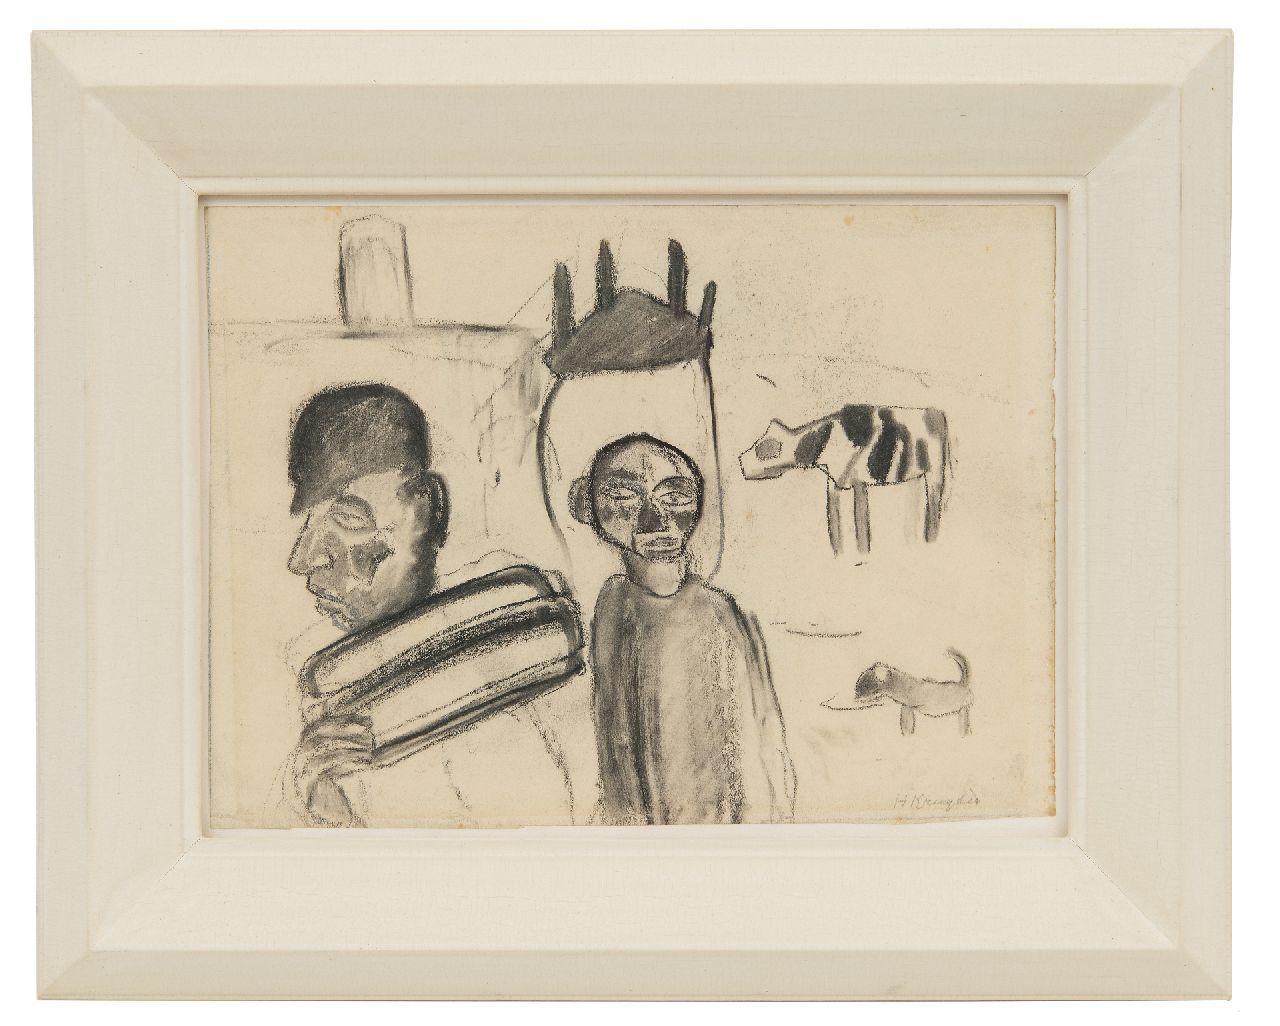 Kruyder H.J.  | 'Herman' Justus Kruyder | Watercolours and drawings offered for sale | Two men with a cow and dog, charcoal on paper 19.1 x 26.1 cm, signed l.r. and executed ca. 1920